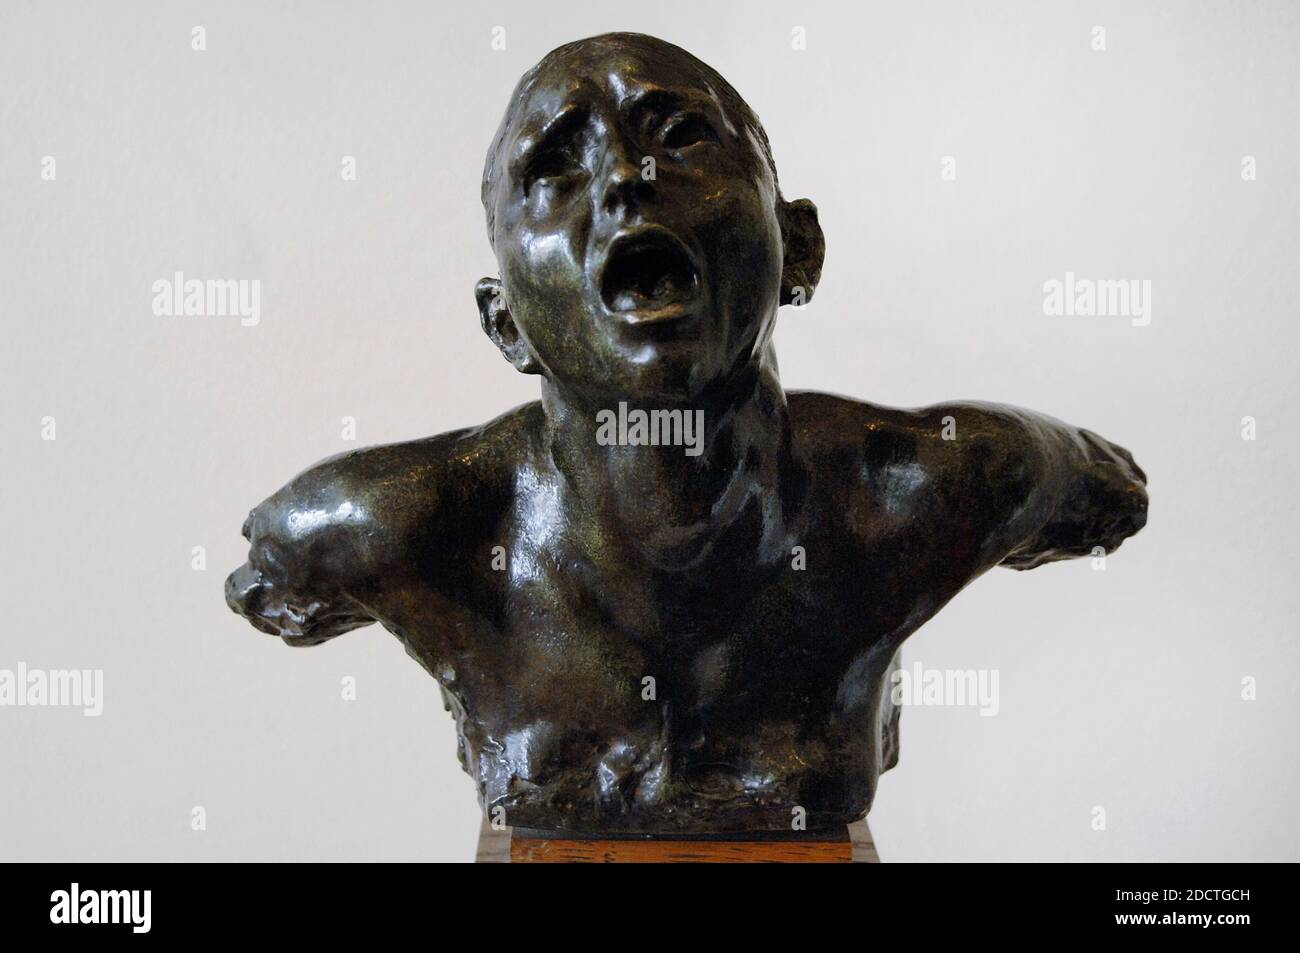 Auguste Rodin (1840-1917). French sculptor. The Cry, ca.1886. Bronze.  Foundry Georges Rudier. Rodin Museum. Paris. France Stock Photo - Alamy